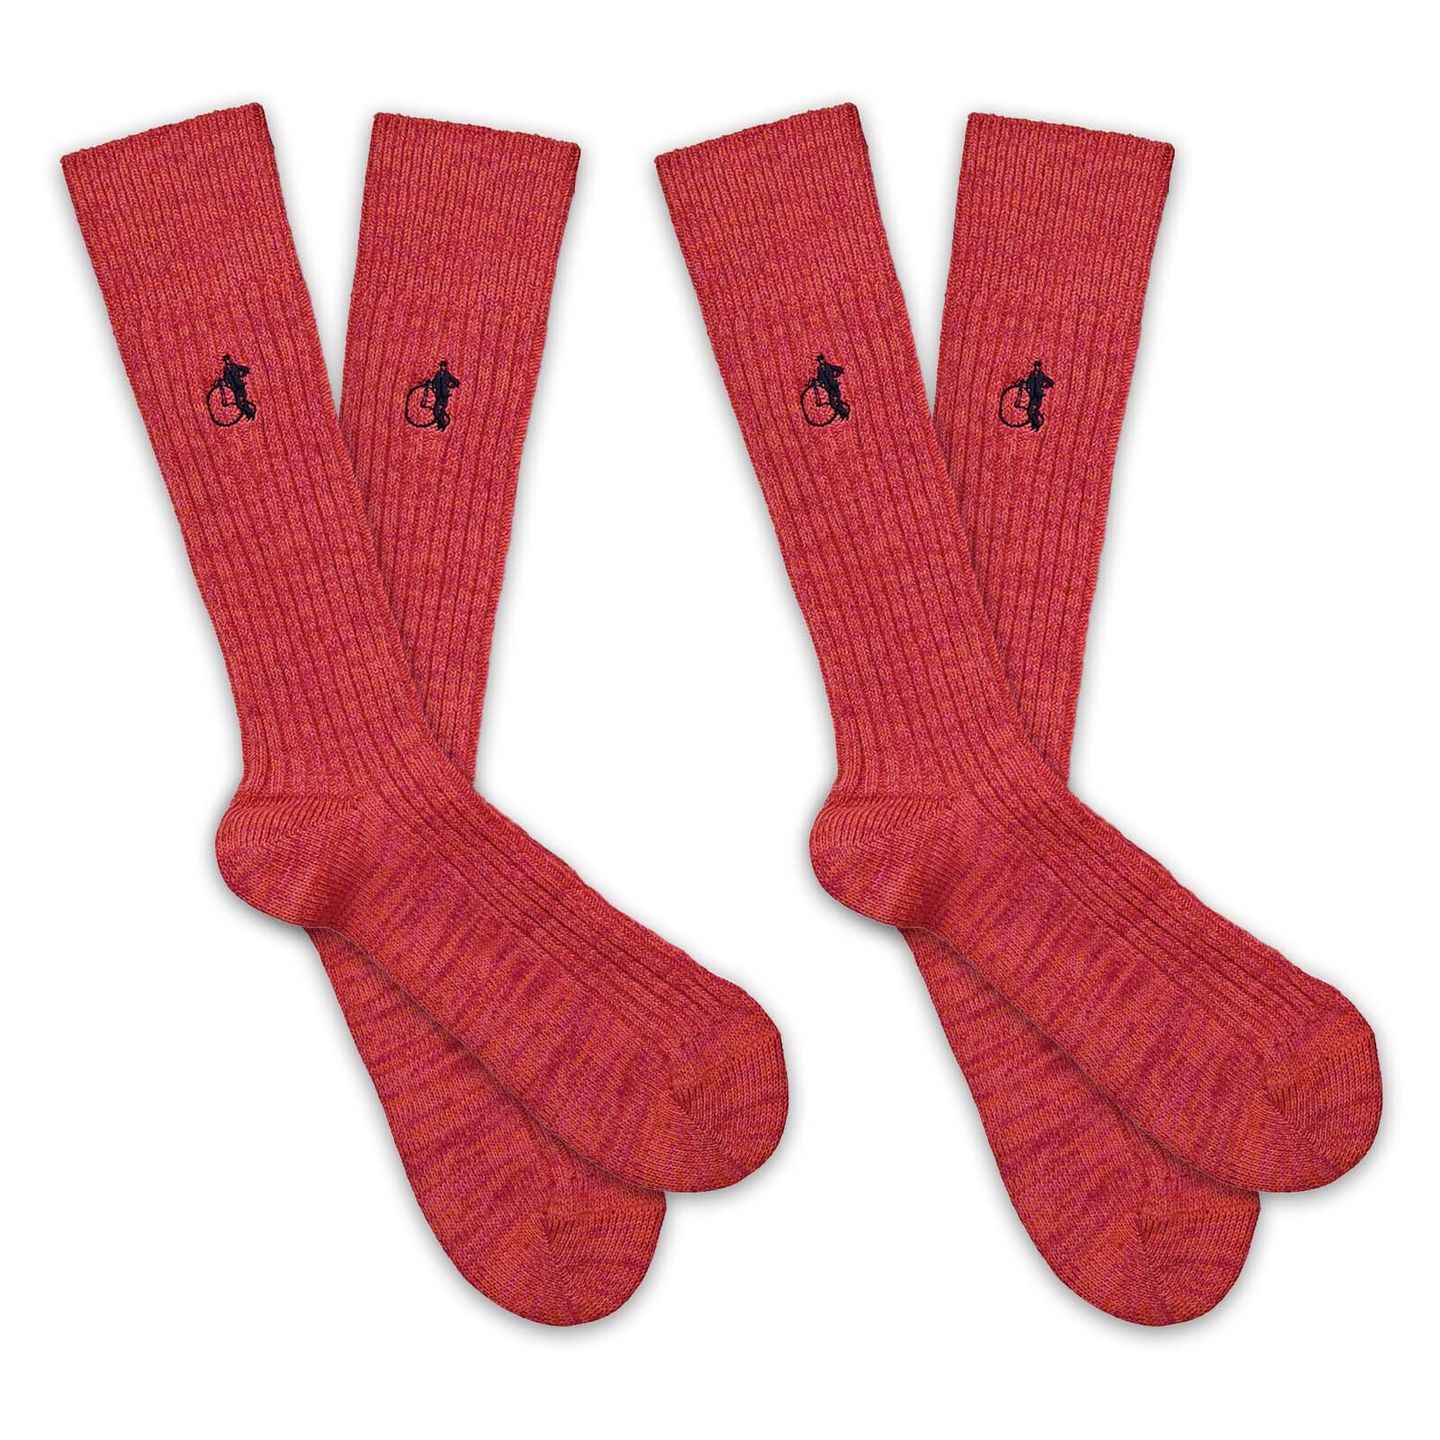 2 pair of red socks with a white background